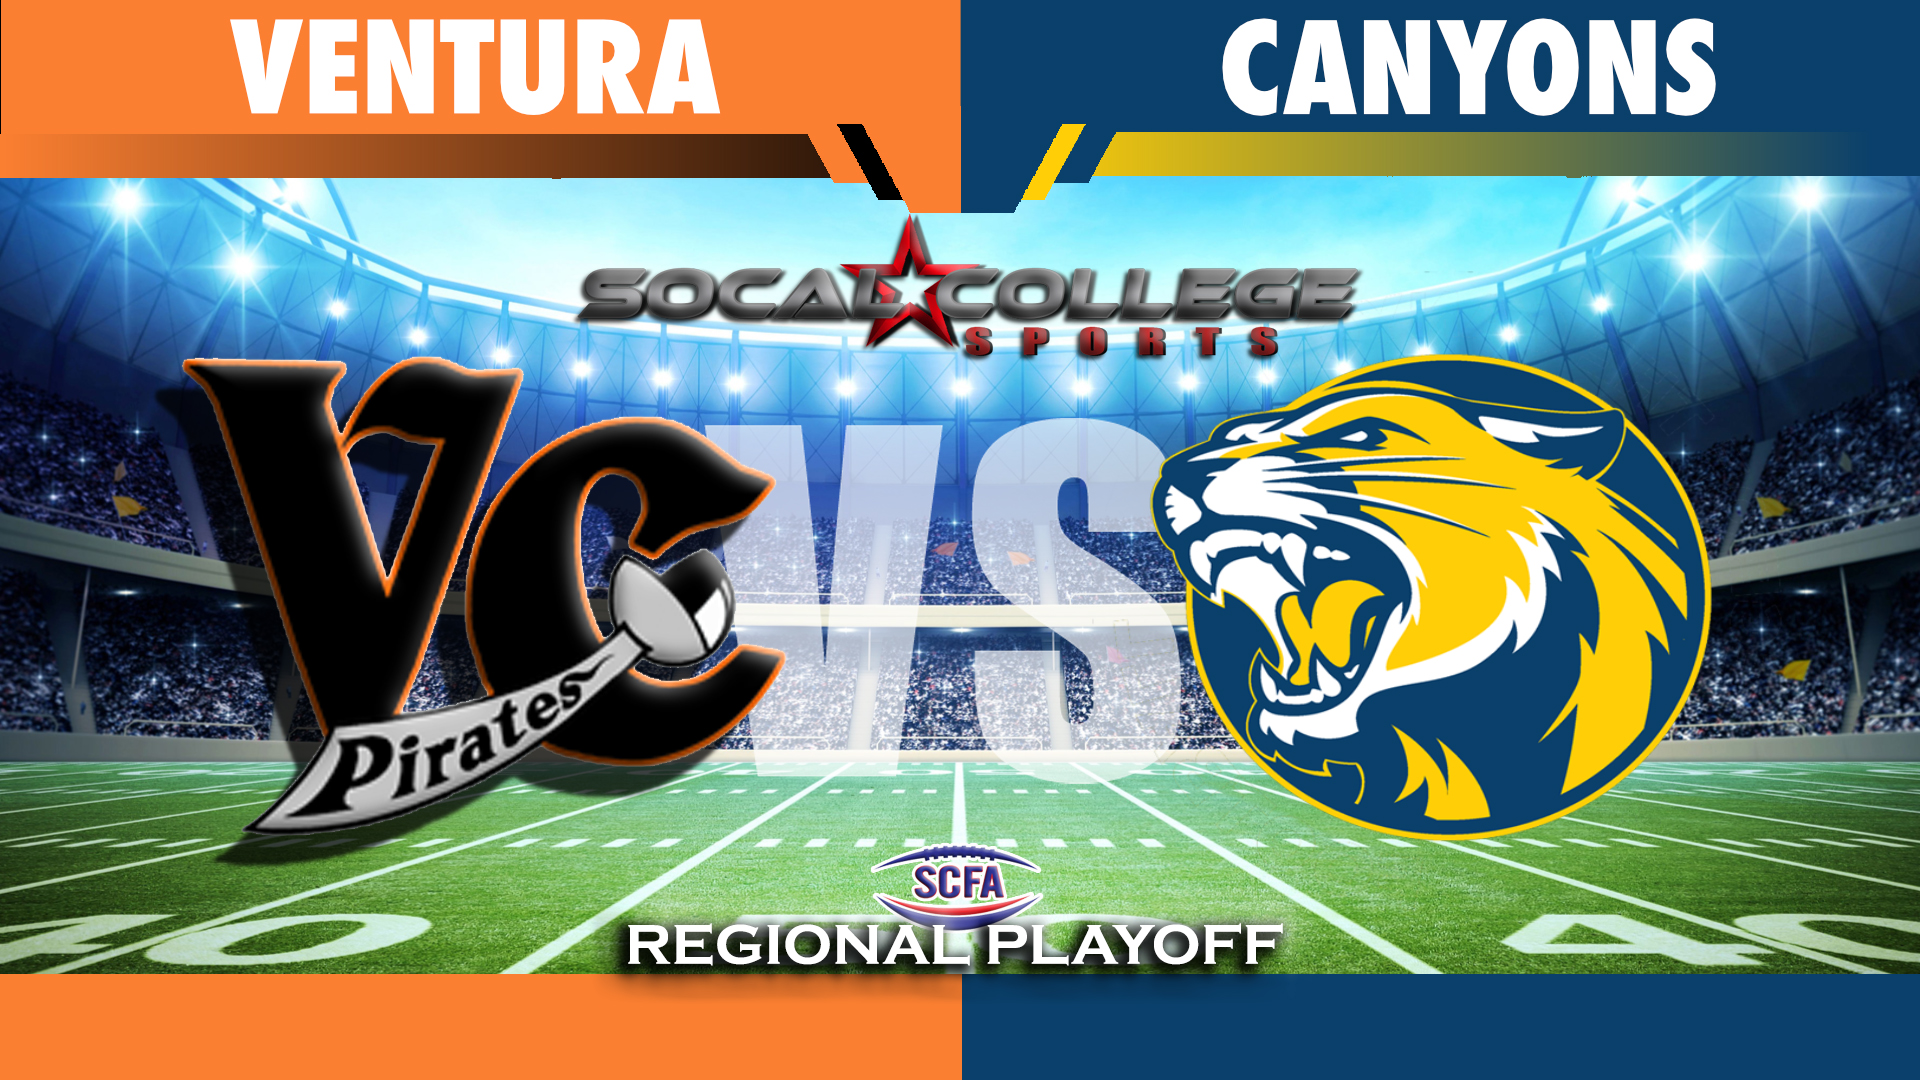 College of the Canyons football will host Ventura College in a CCCAA Regional Playoff game at 6 p.m. Saturday, Nov. 17.